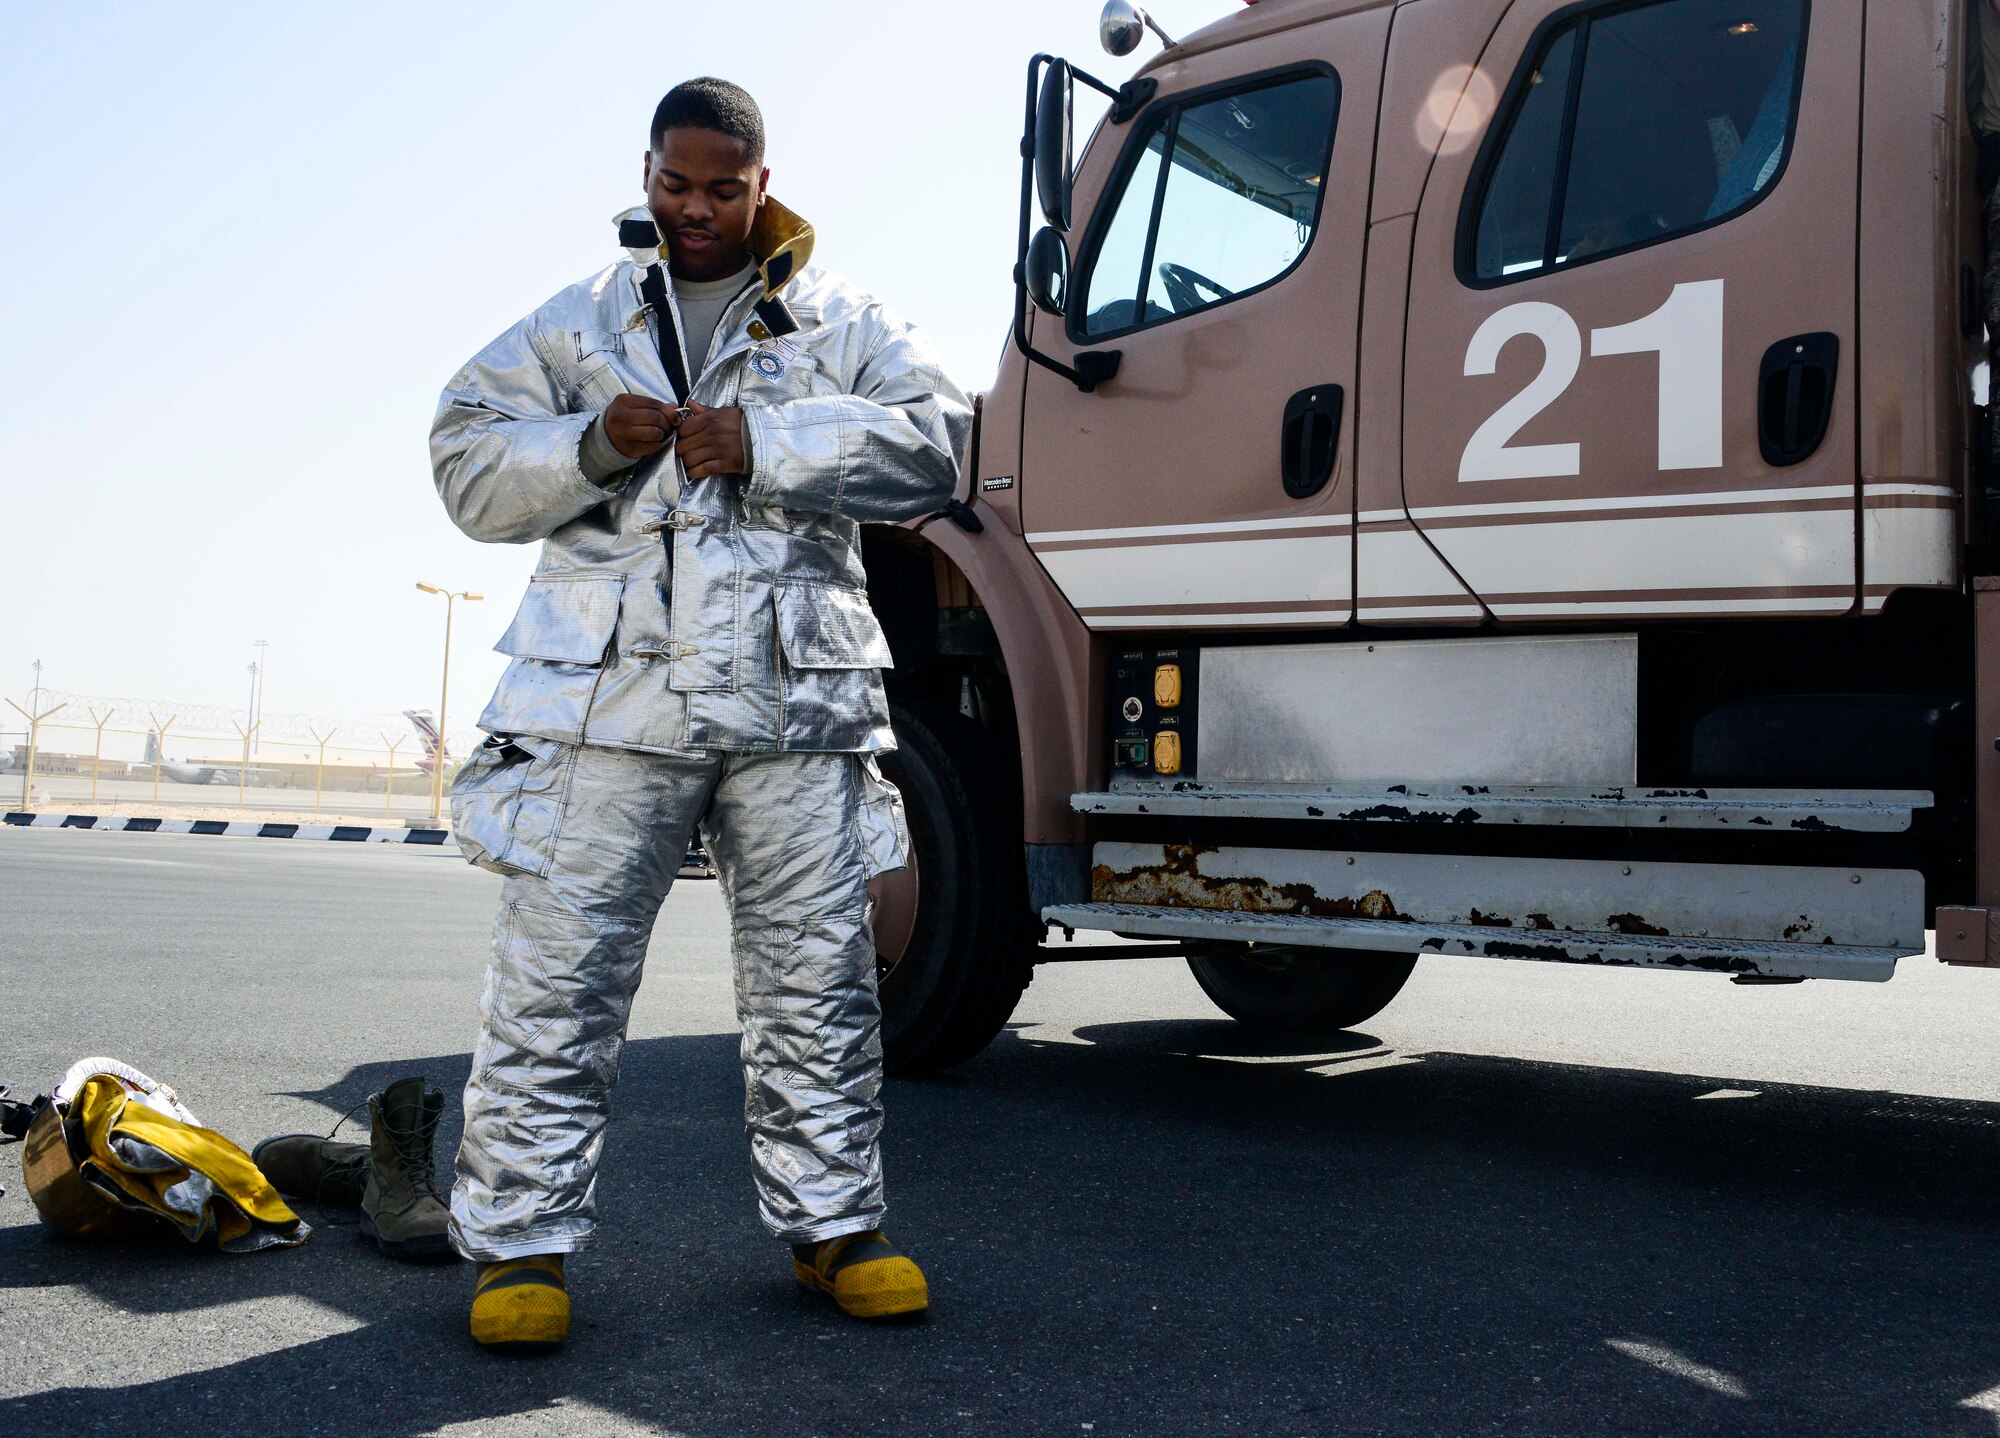 Senior Airman Dashawn Gilford, 379th Expeditionary Civil Engineer Squadron firefighter, dons his personal protective equipment prior to stretching a 1 ¾-inch hand line from the side of Engine 21 June 24, 2016, at Al Udeid Air Base, Qatar. The 379th ECES fire department consists of enlisted personnel from Active Duty, Air National Guard and Reserve units. Its structure mirrors most fire departments  to include a fire chief, deputy fire chief, training chief, fire prevention and inspection division, and emergency communications center crew chiefs. (U.S. Air Force photo/Senior Airman Janelle Patiño/Released)